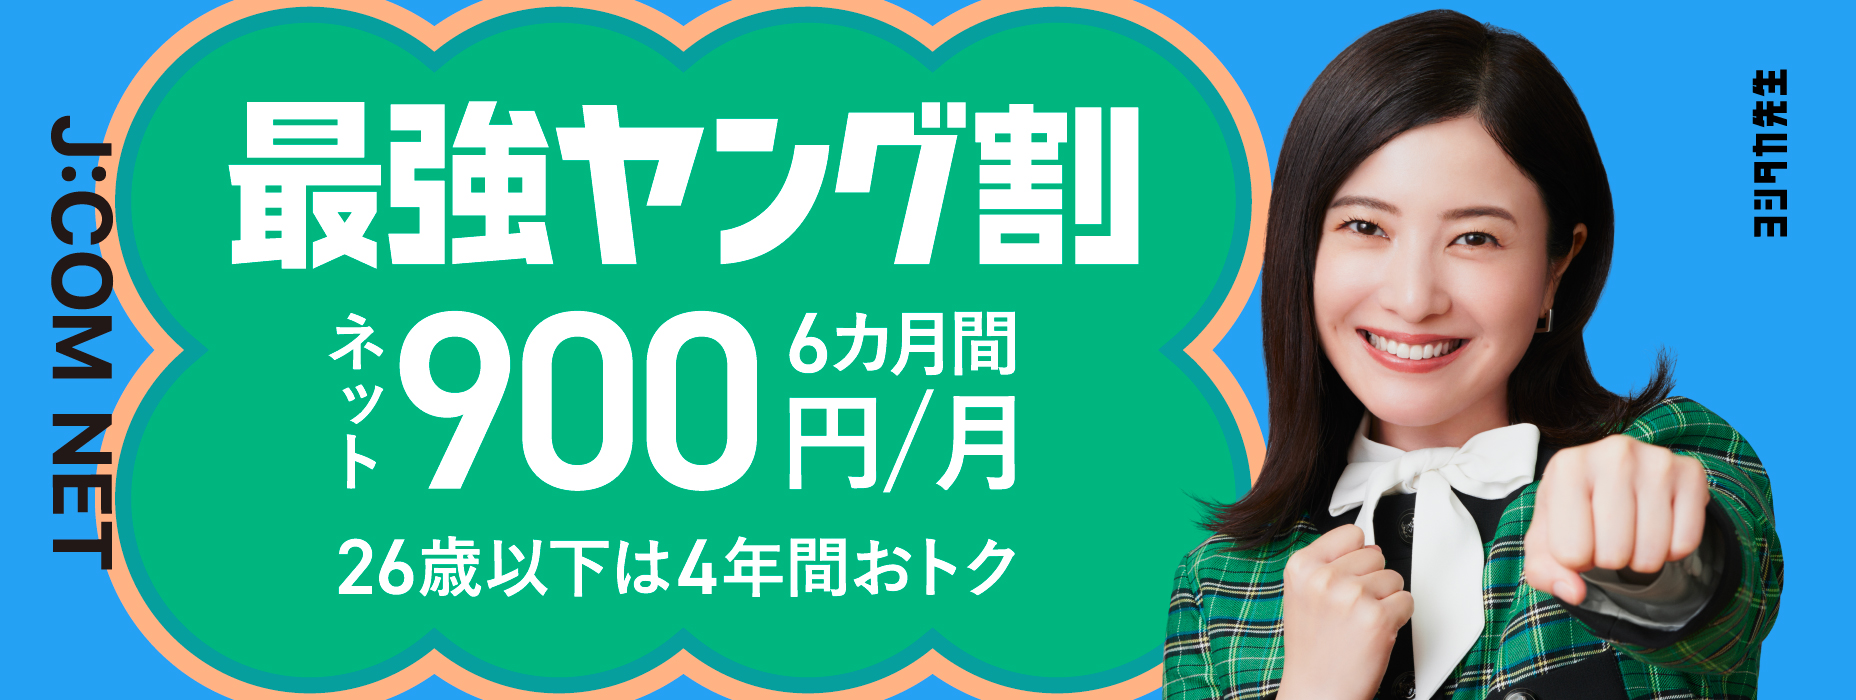 Saikyo Young Wari Net 900 yen/month for 6 months, 4 years discount for under 26s